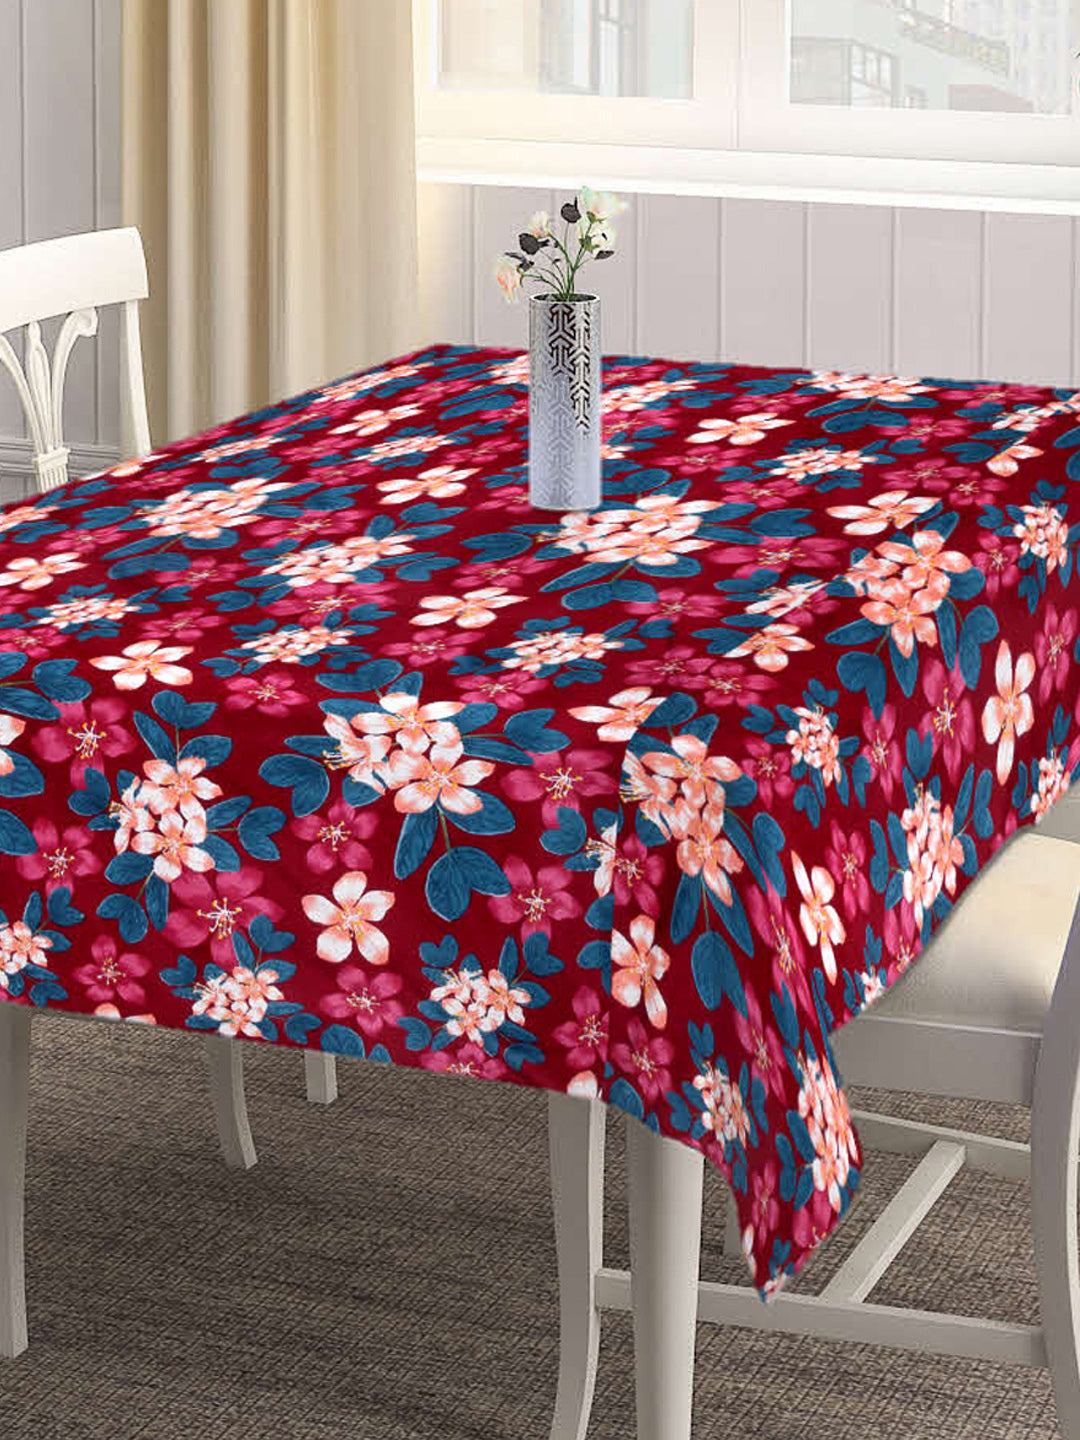 Arrabi Red Floral Cotton Blend 6 SEATER Table Cover (180 X 130 cm)